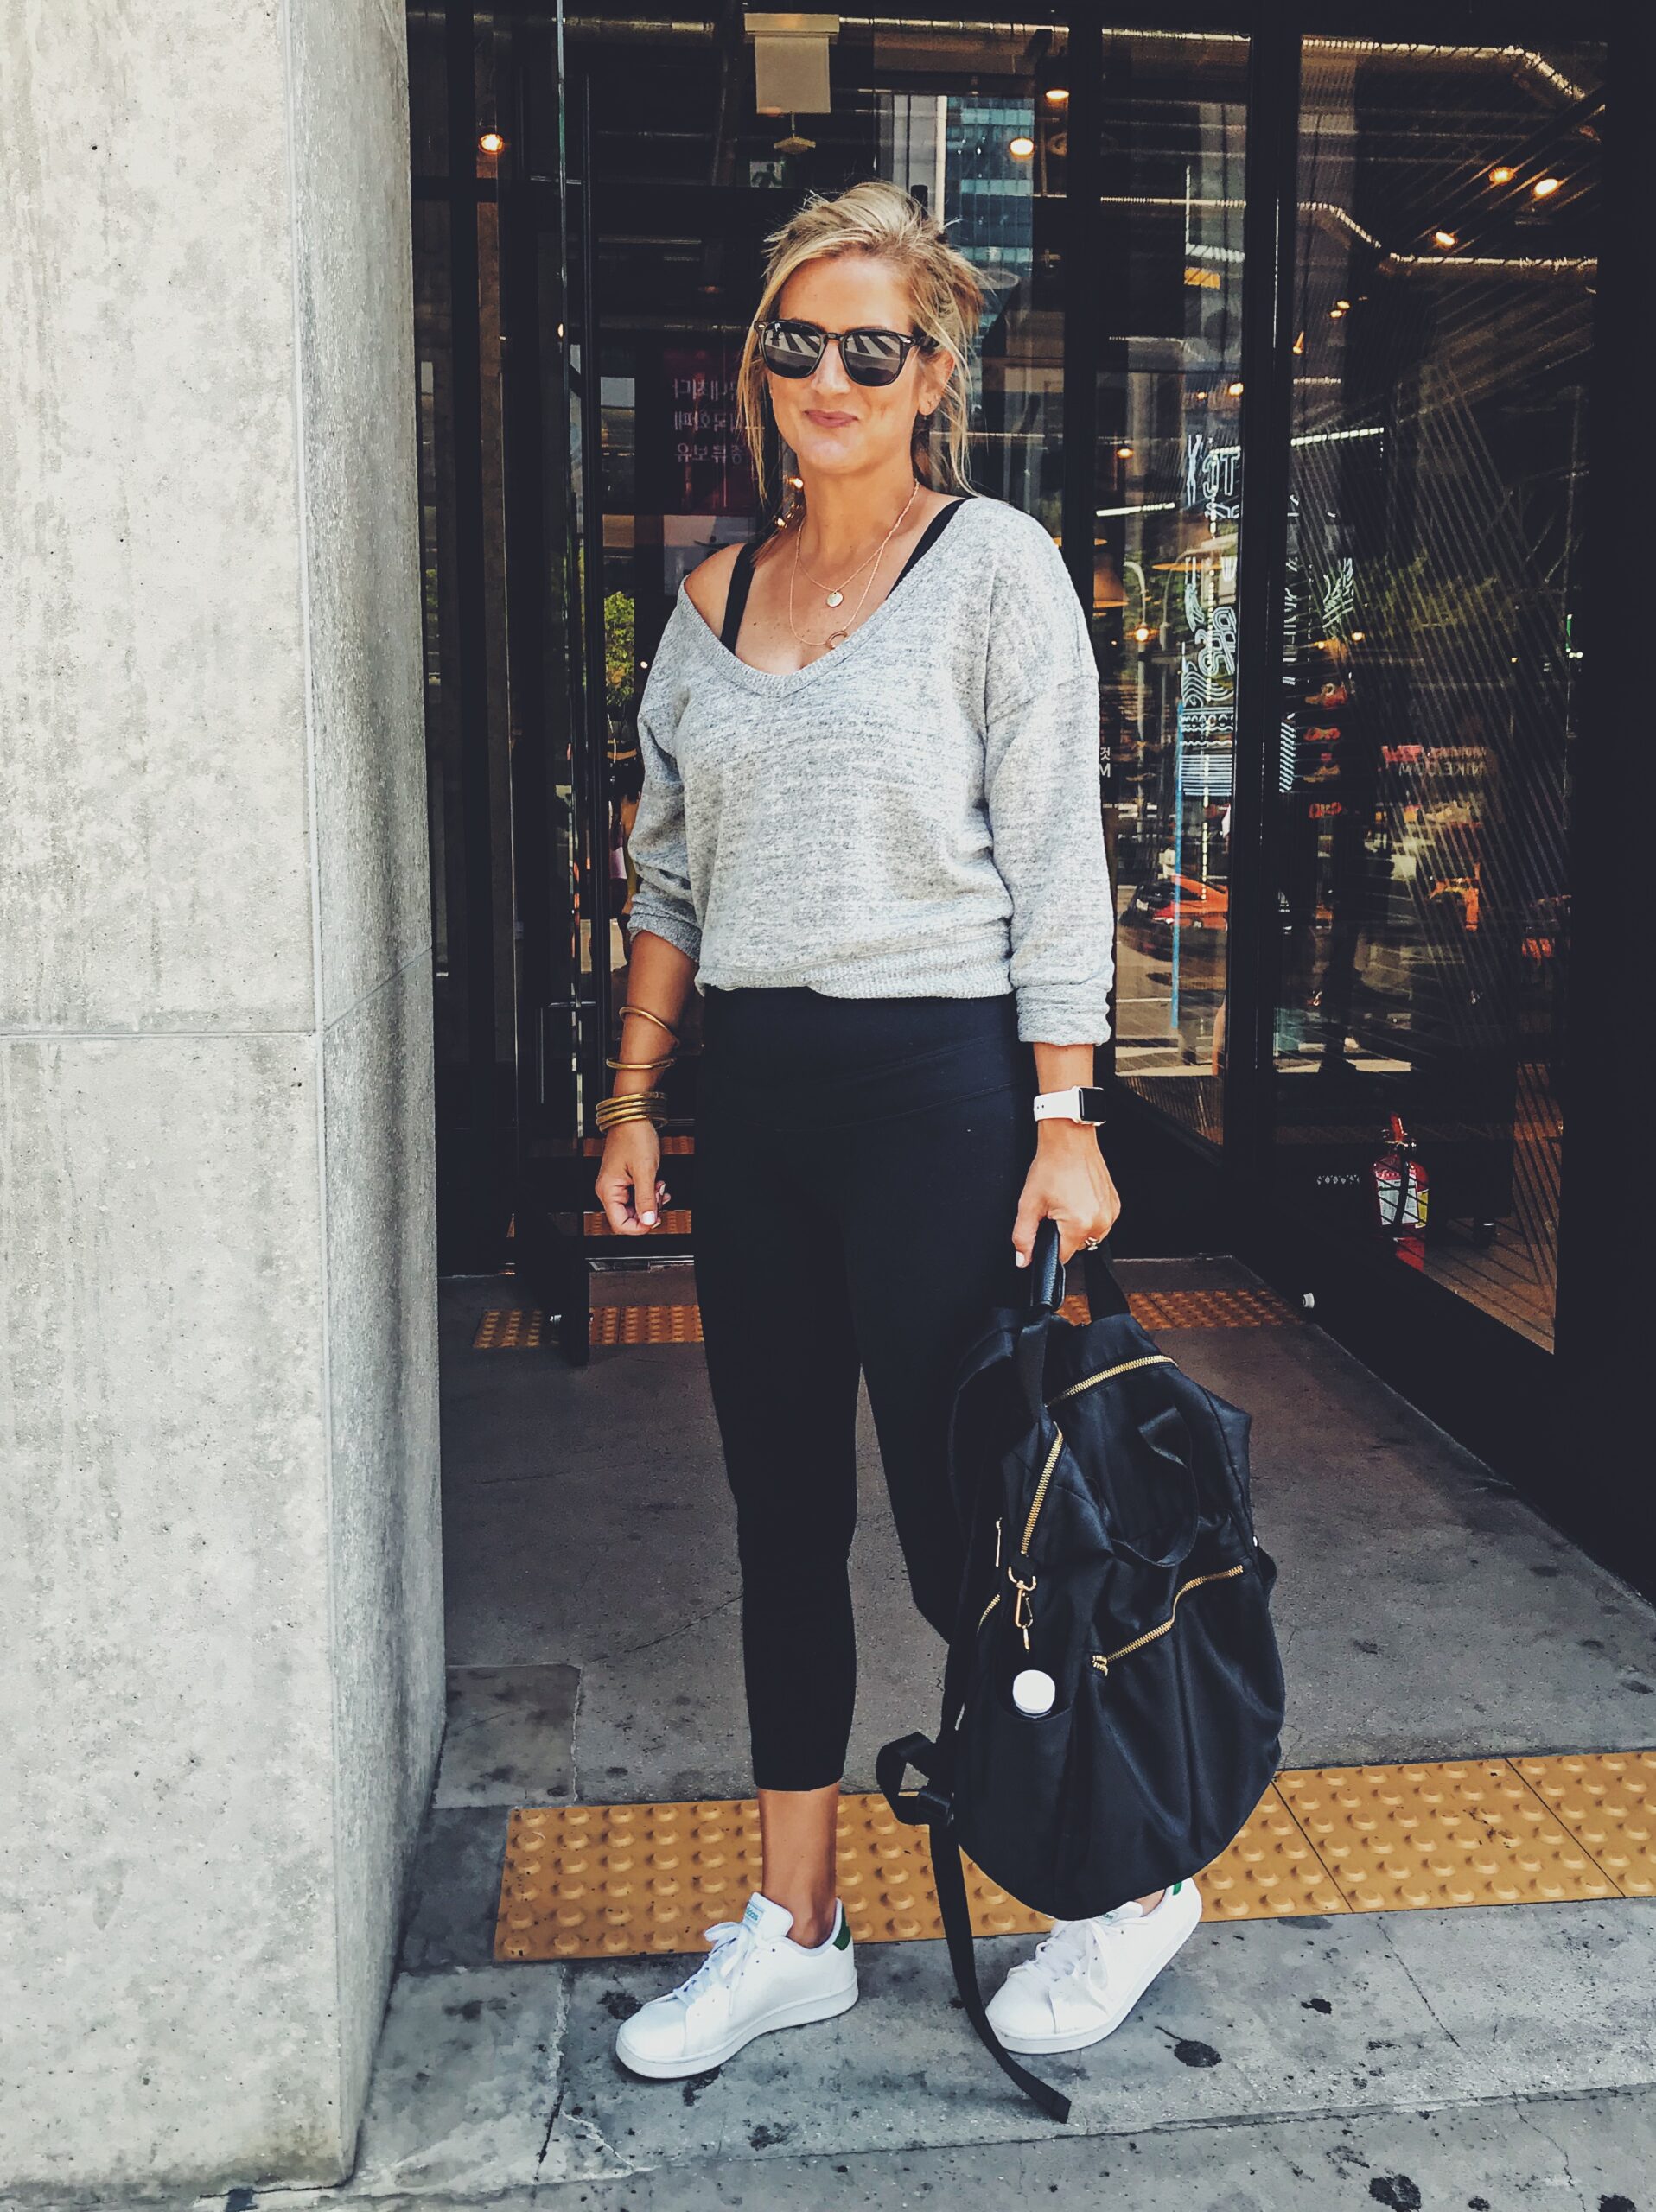 How to Wear White Sneakers (4 Outfit Ideas)